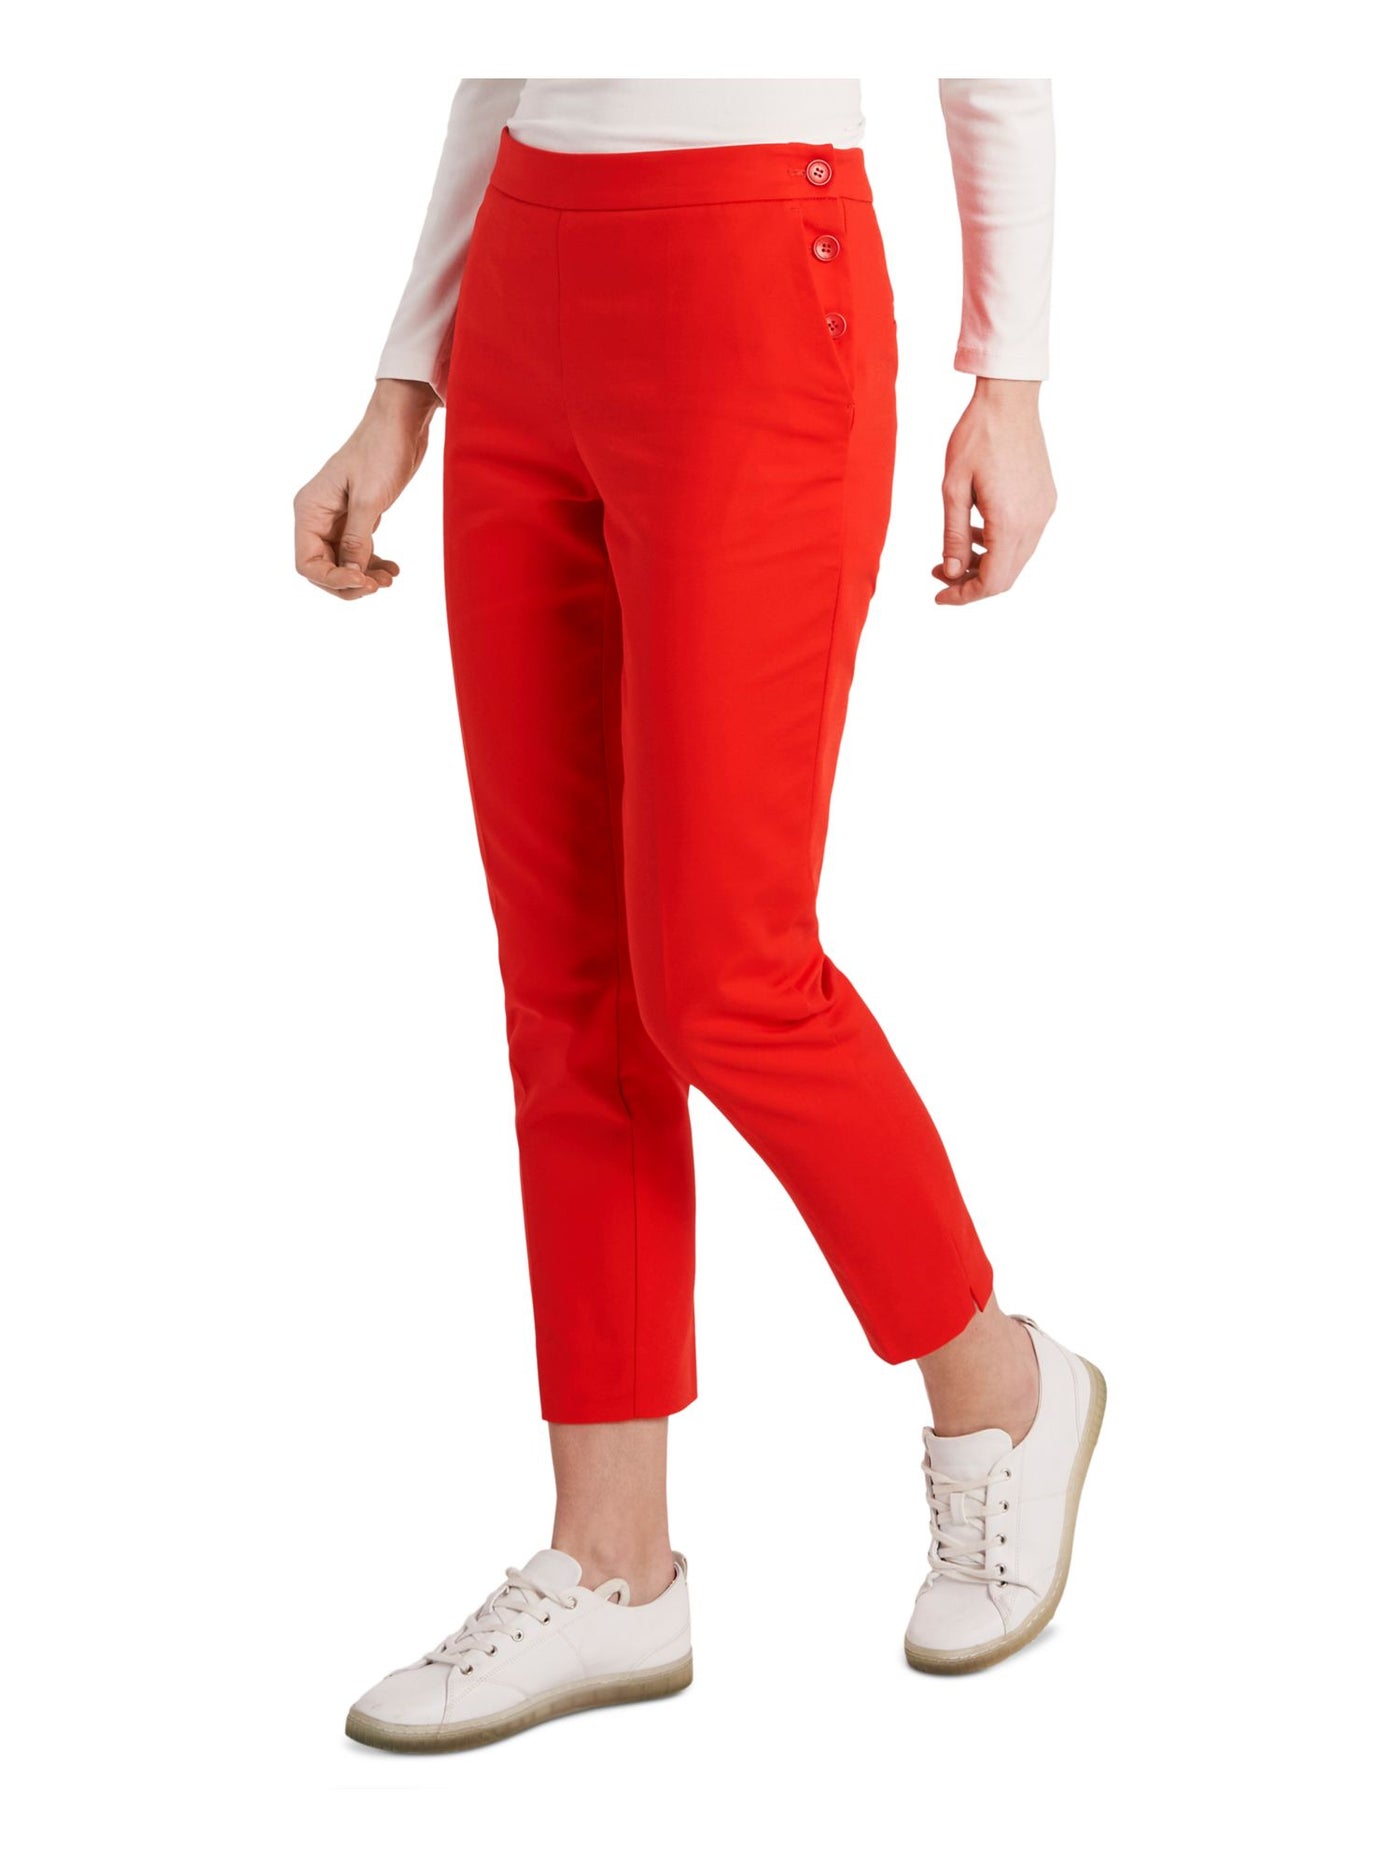 RILEY&RAE Womens Red Stretch Pocketed Button Closure Side Seam Straight leg Pants 2